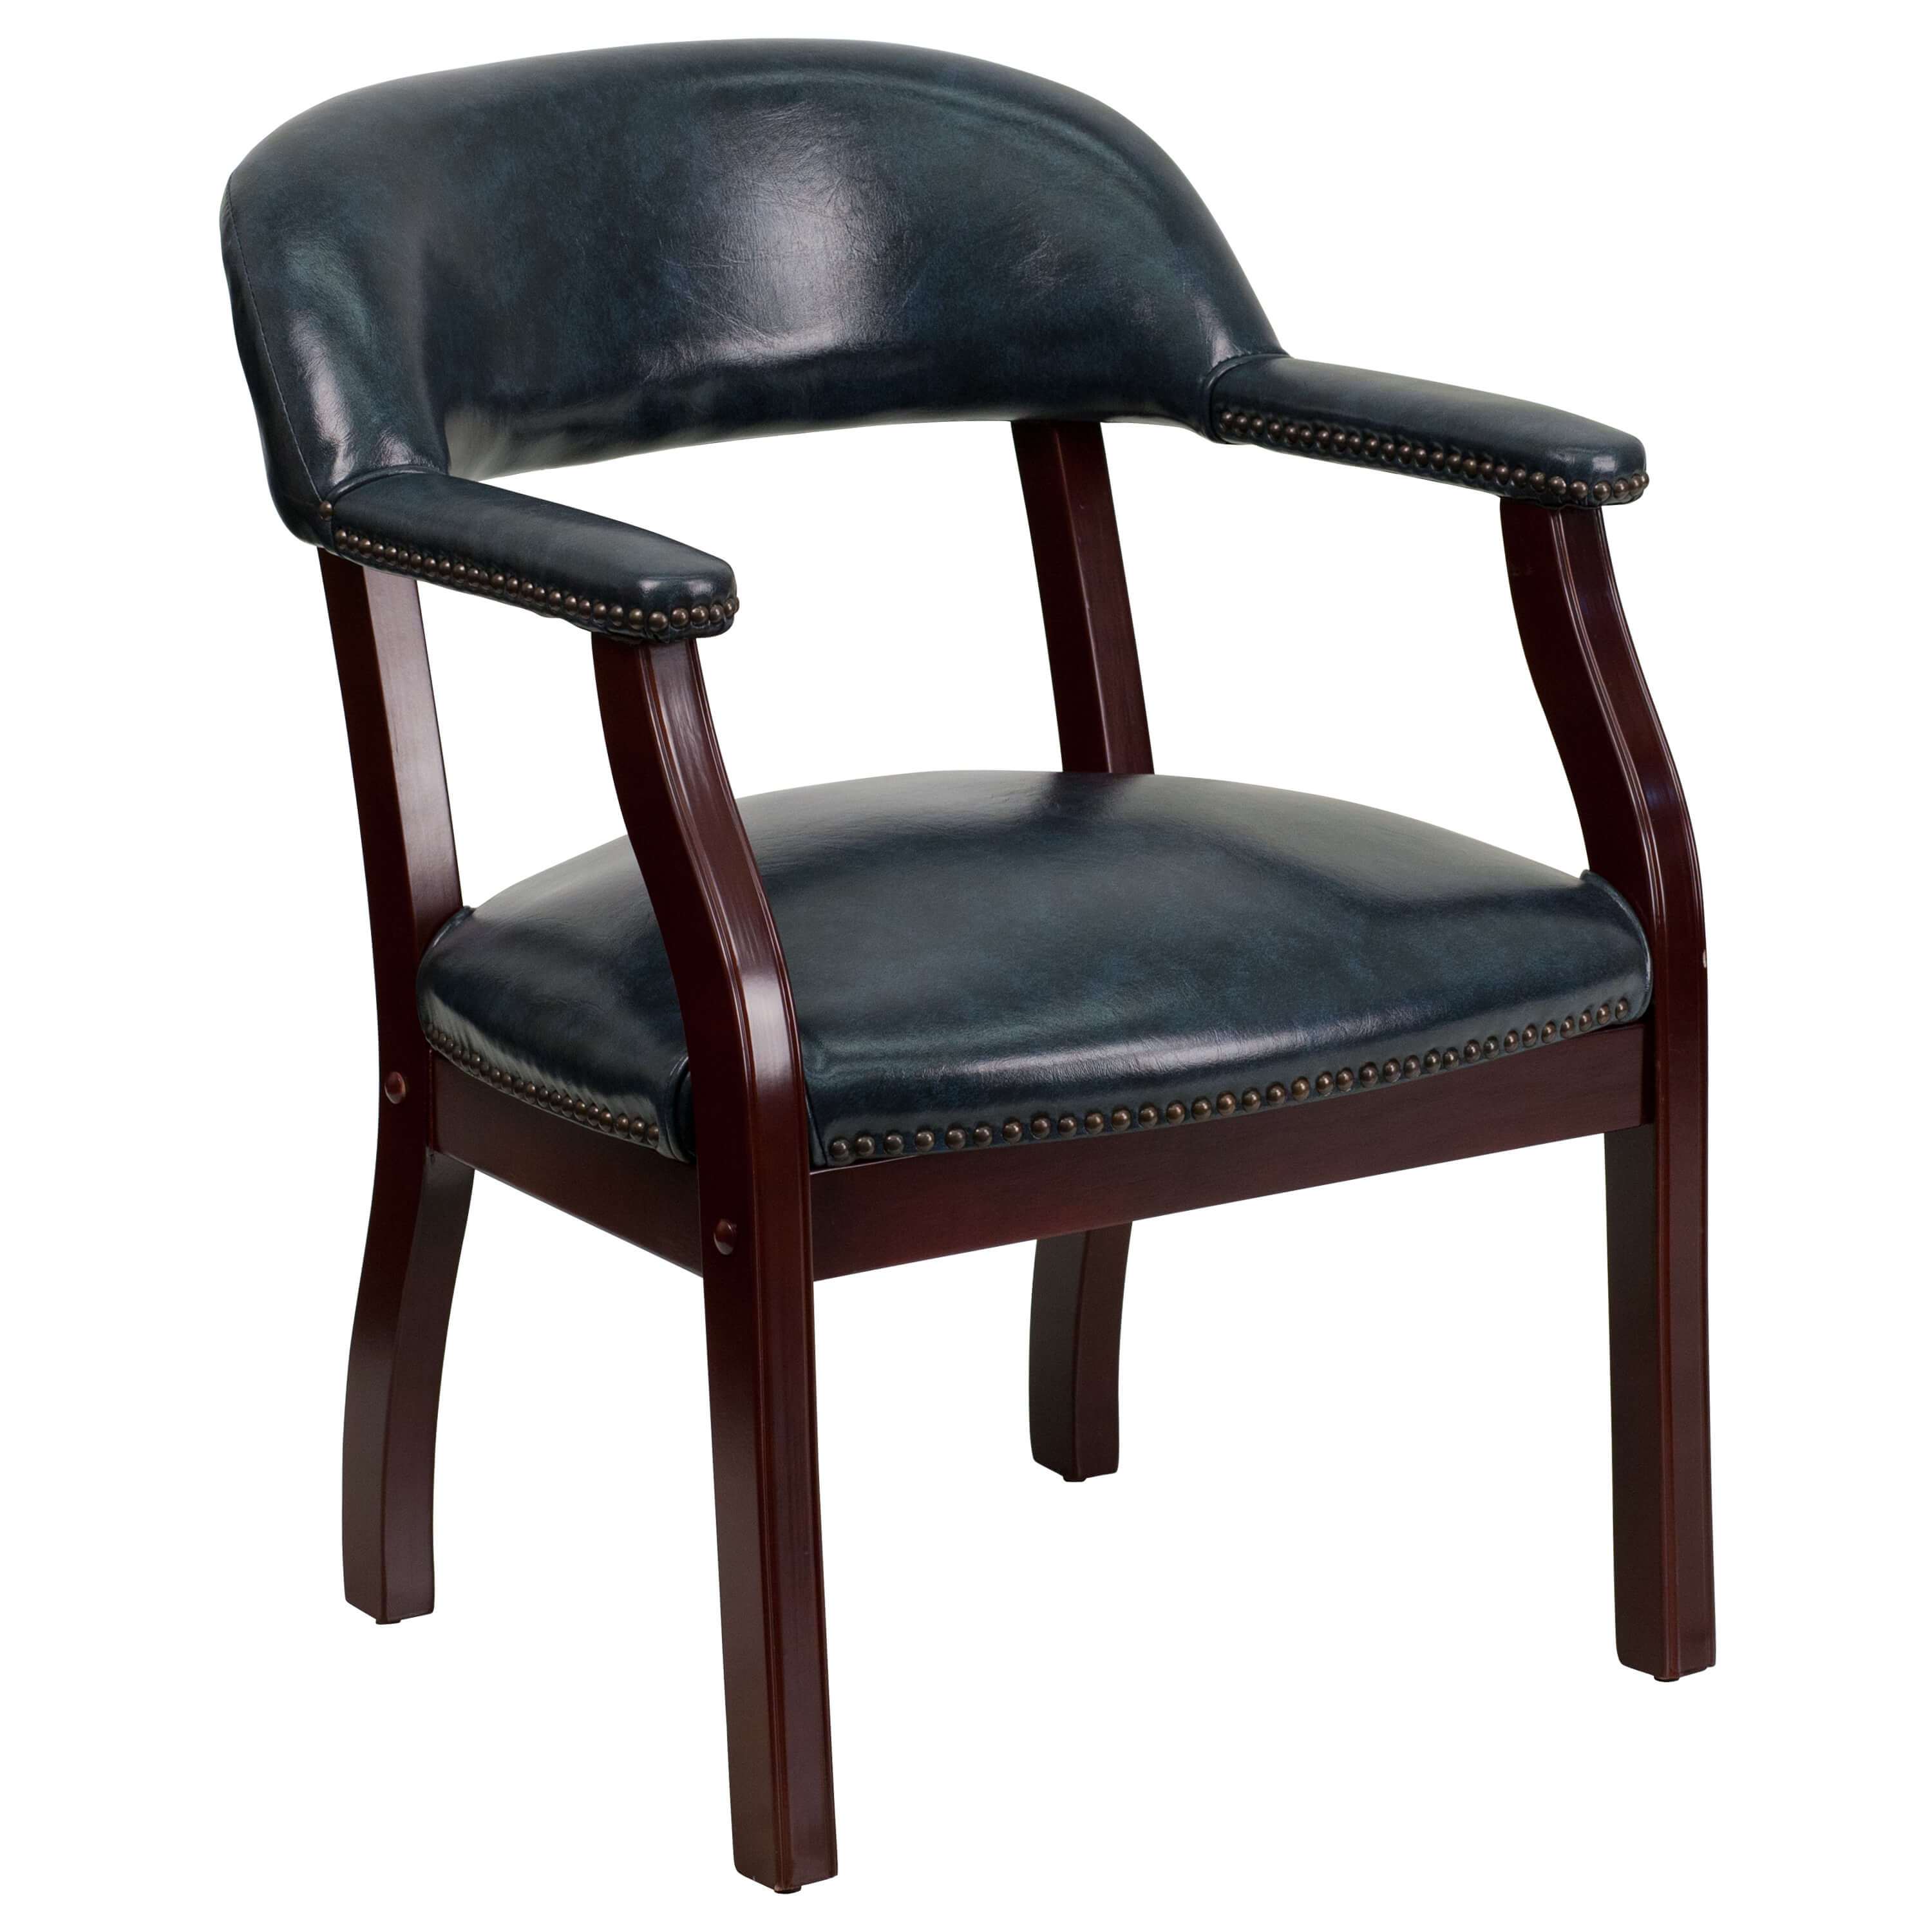 Side chairs with arms CUB B Z105 NAVY GG FLA